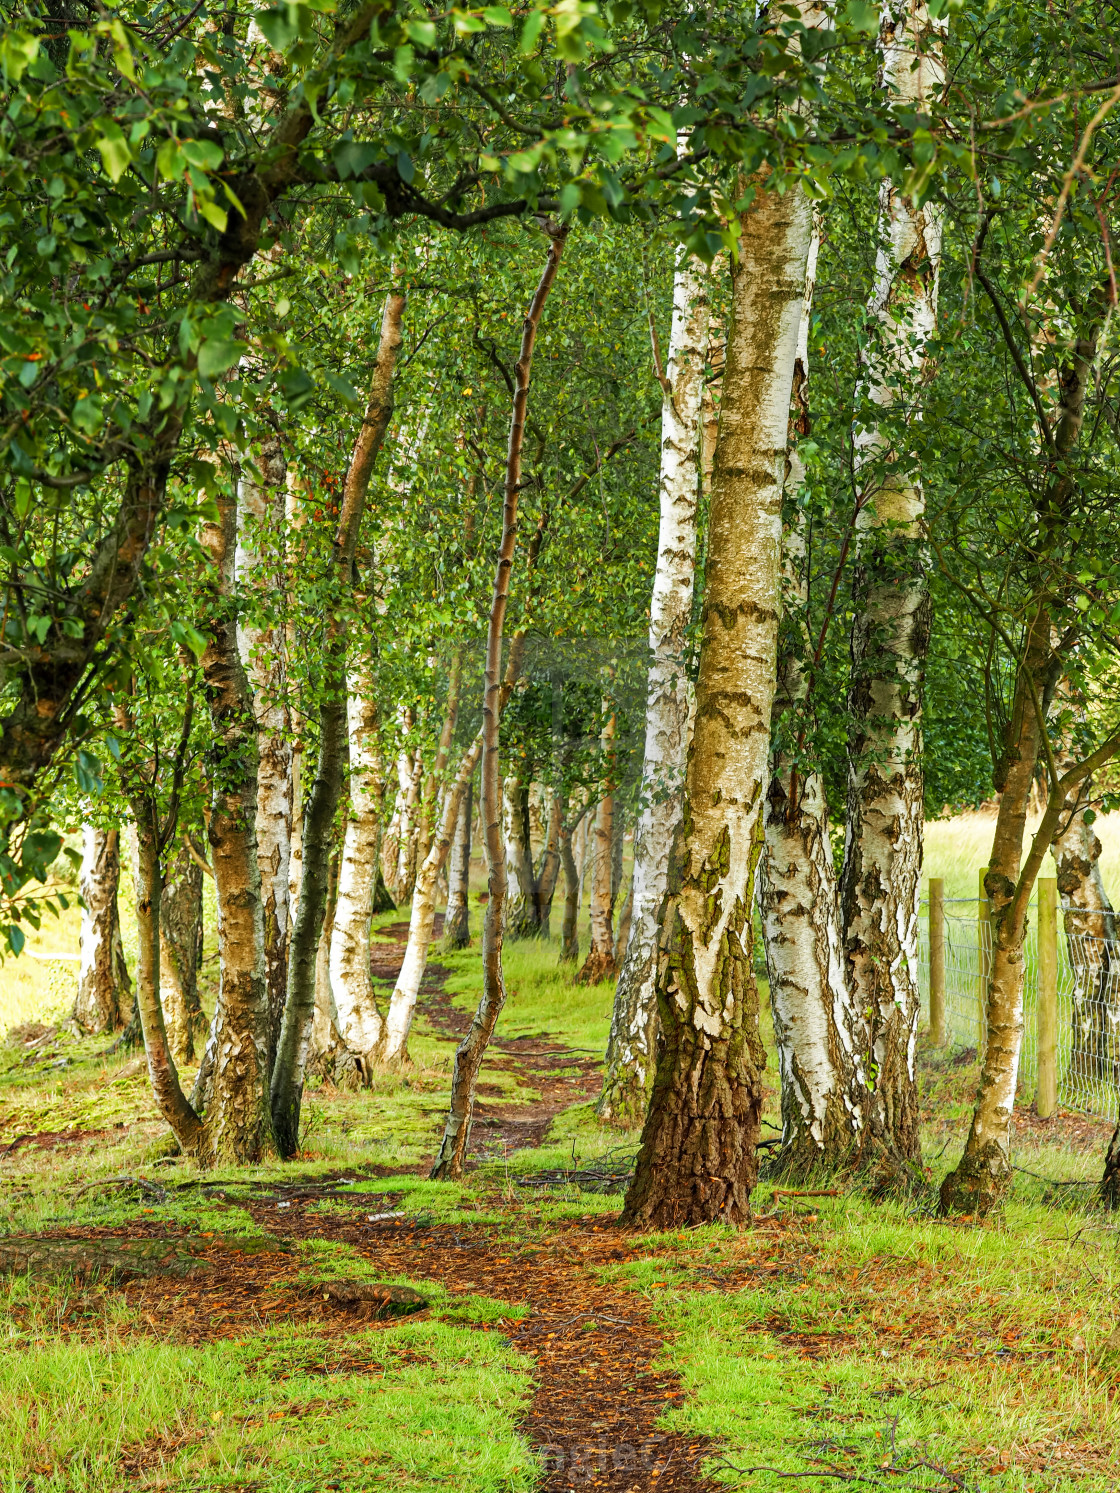 "Path through silver birch trees in a wood" stock image